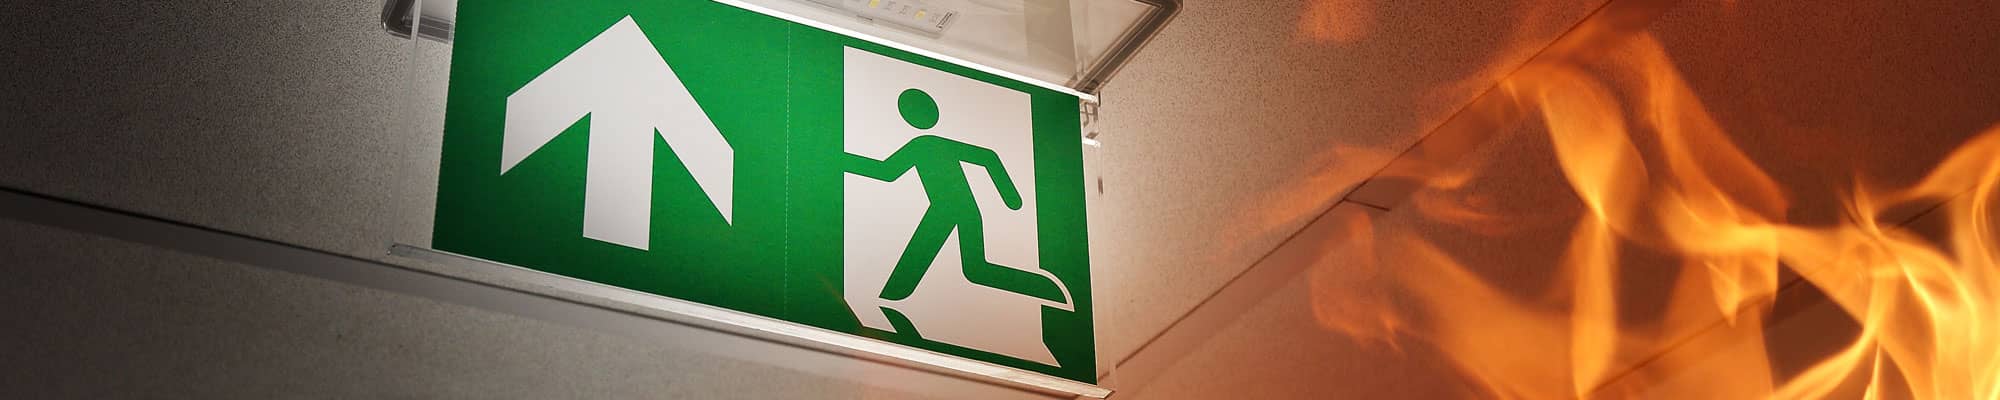 Fire exit signage at Chester business park based company